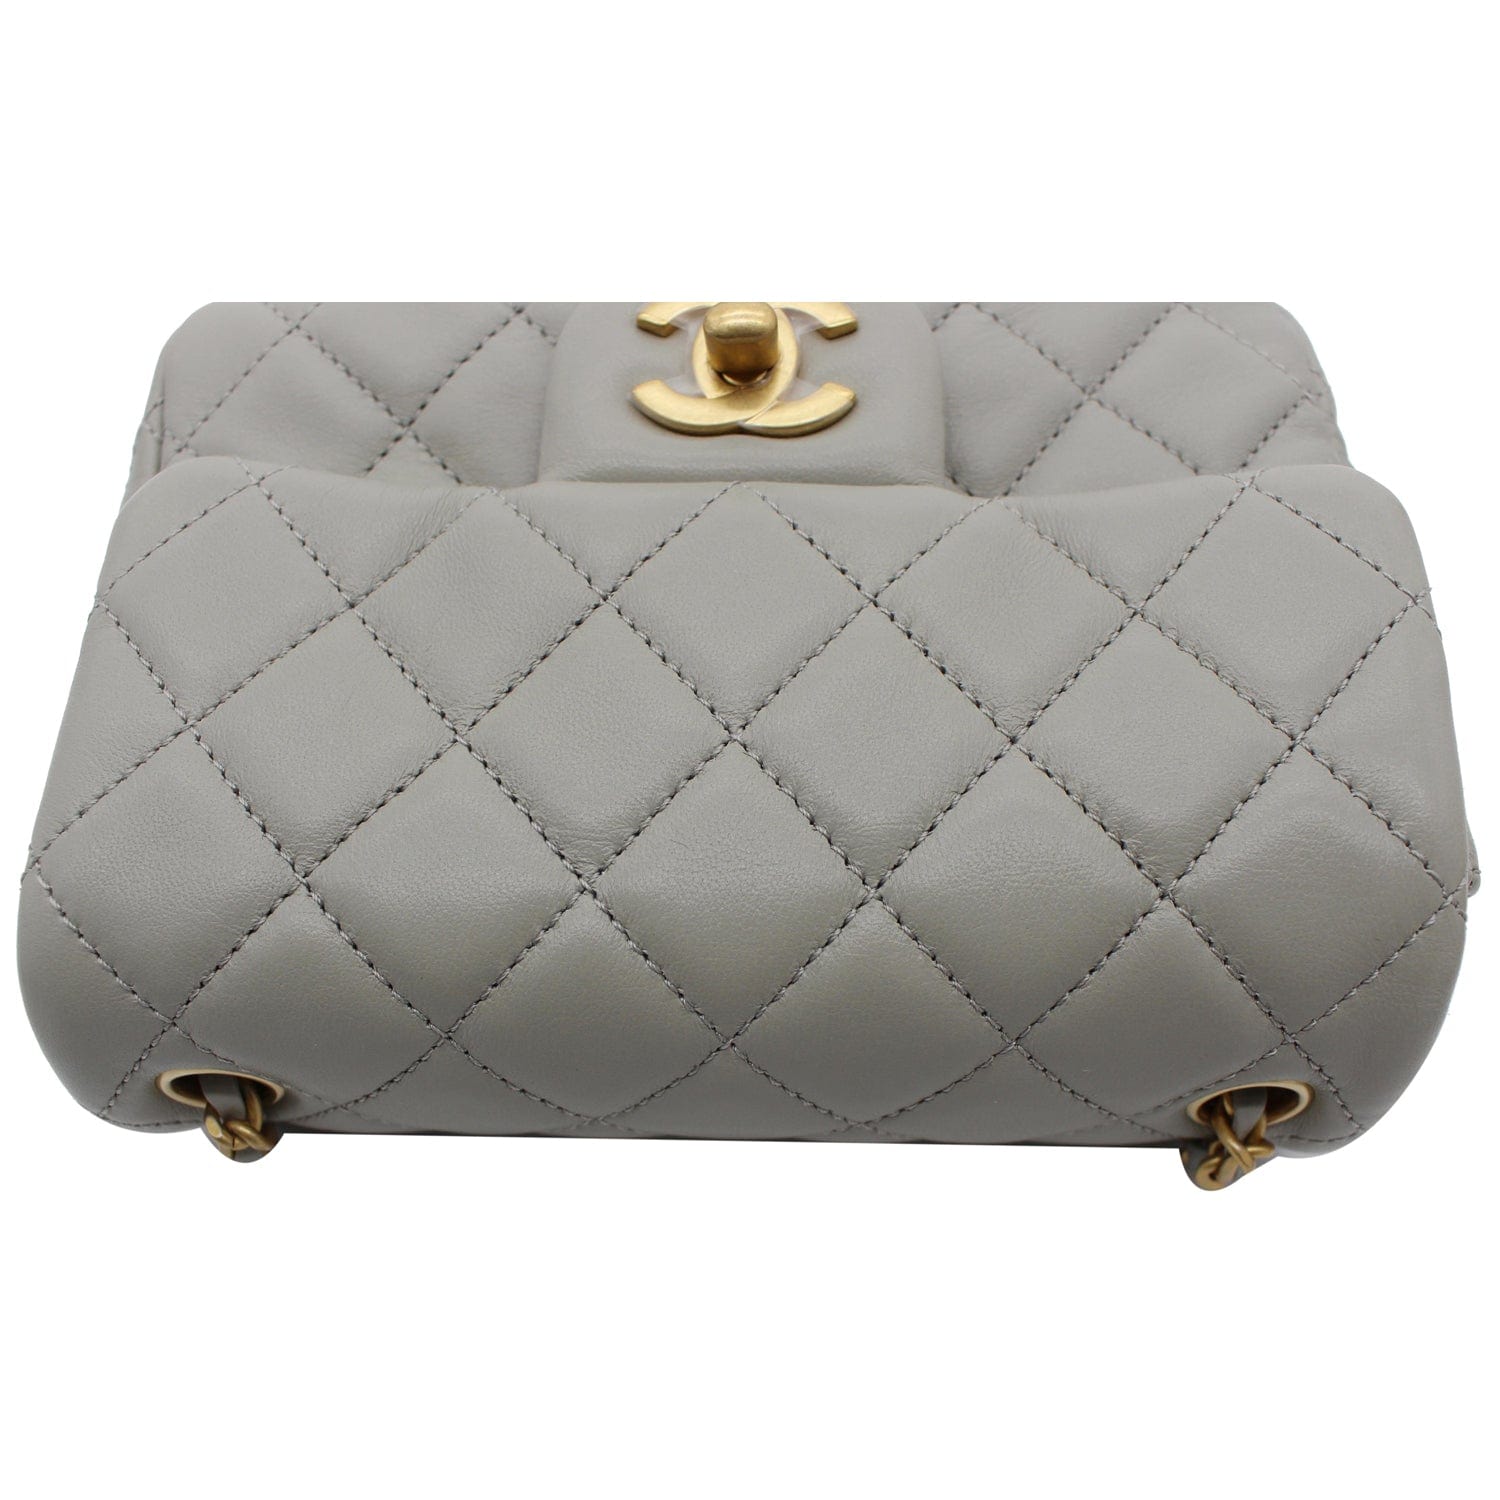 MODA ARCHIVE X REBAG Pre-Owned Chanel Mini Pearl Crush Quilted Leather Flap  Clutch with Chain - ShopStyle